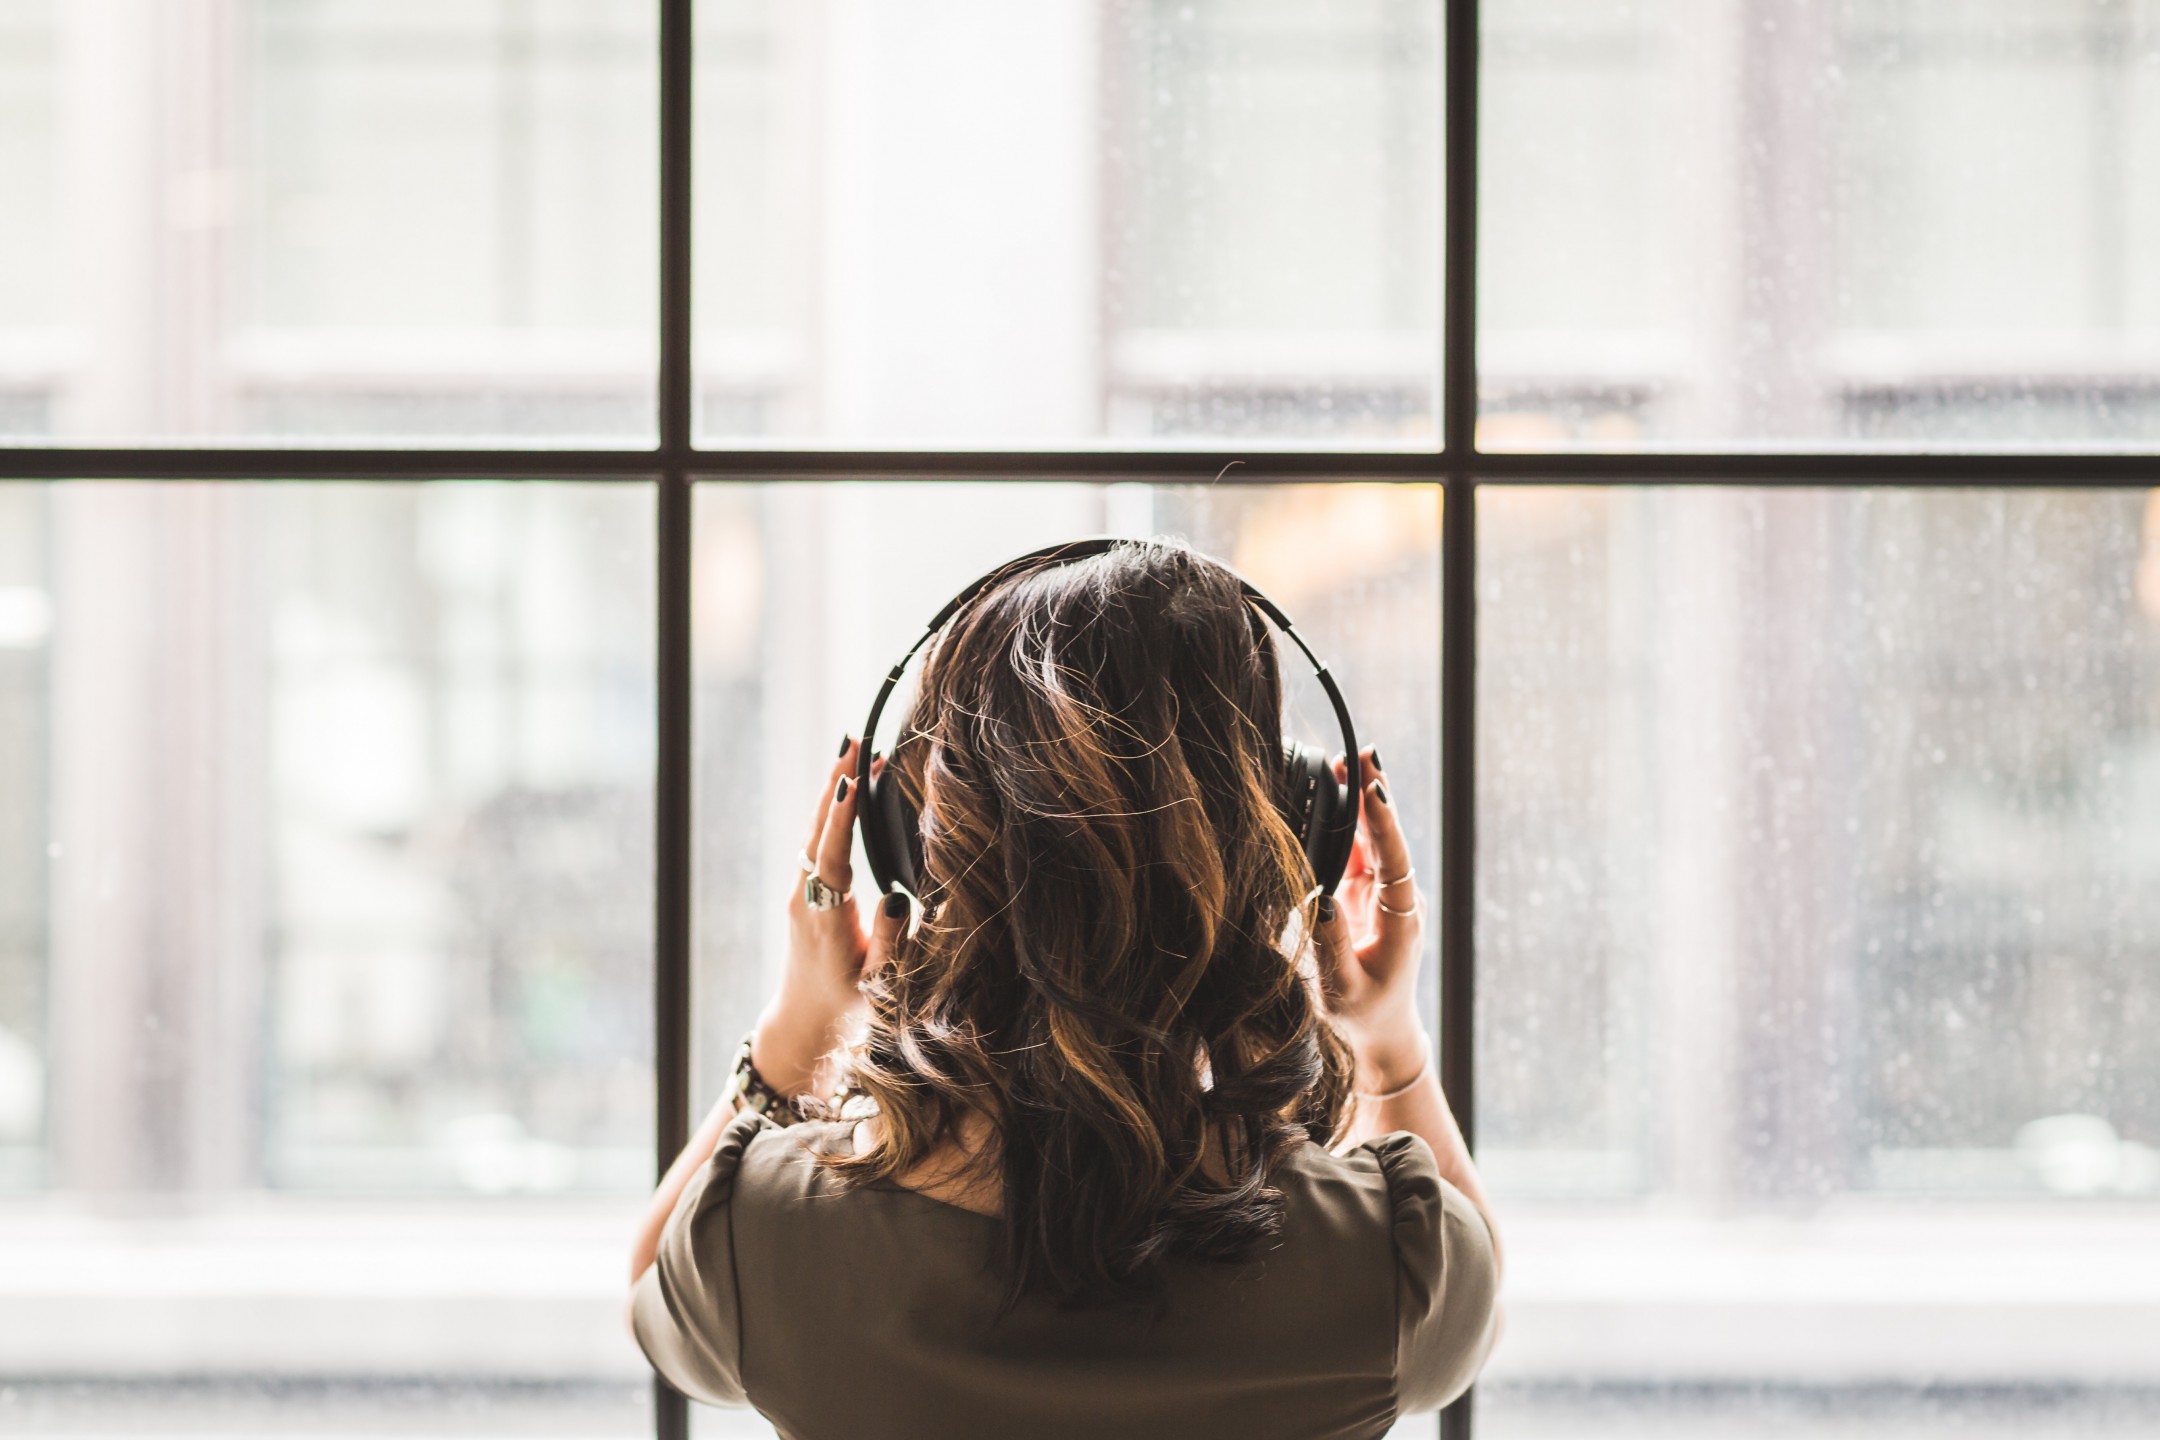 squarerooms-noise-cancelling-headphones-woman-back-view-window